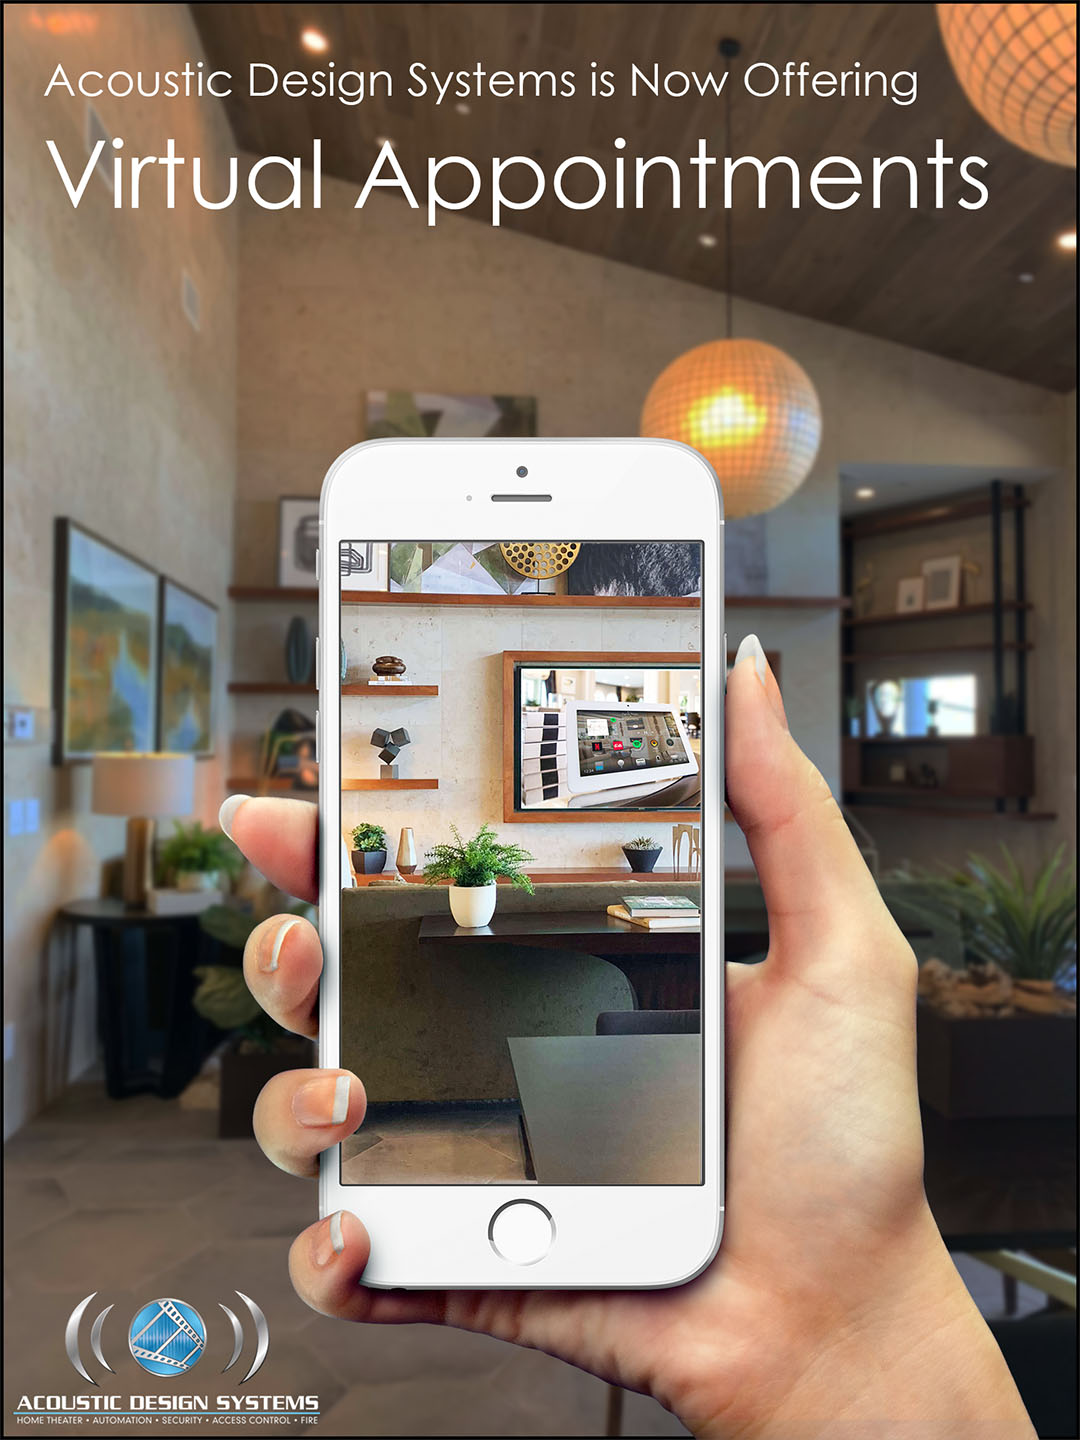 Connect with Us via Virtual Appointments